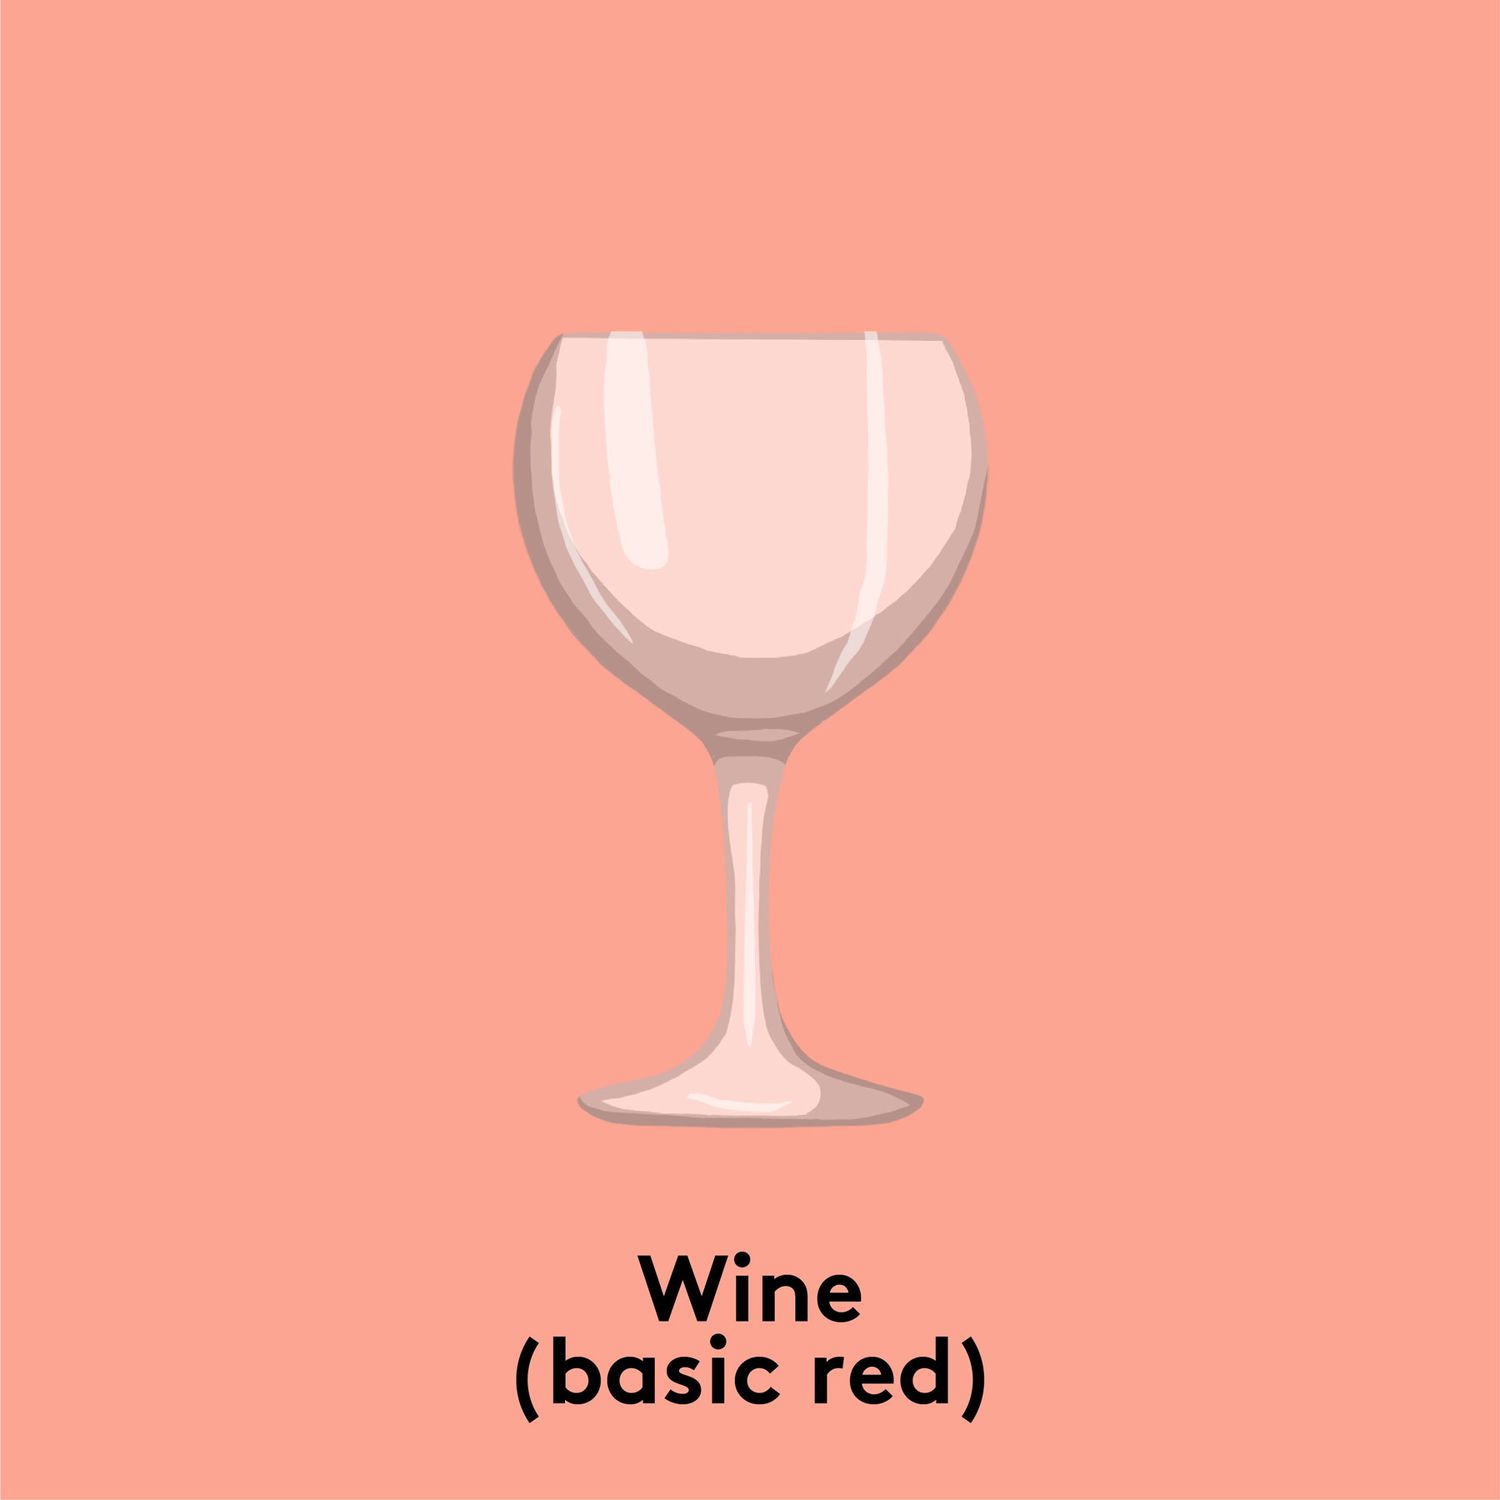 Types of cocktail, wine, drinking glasses - Red Wine Glass